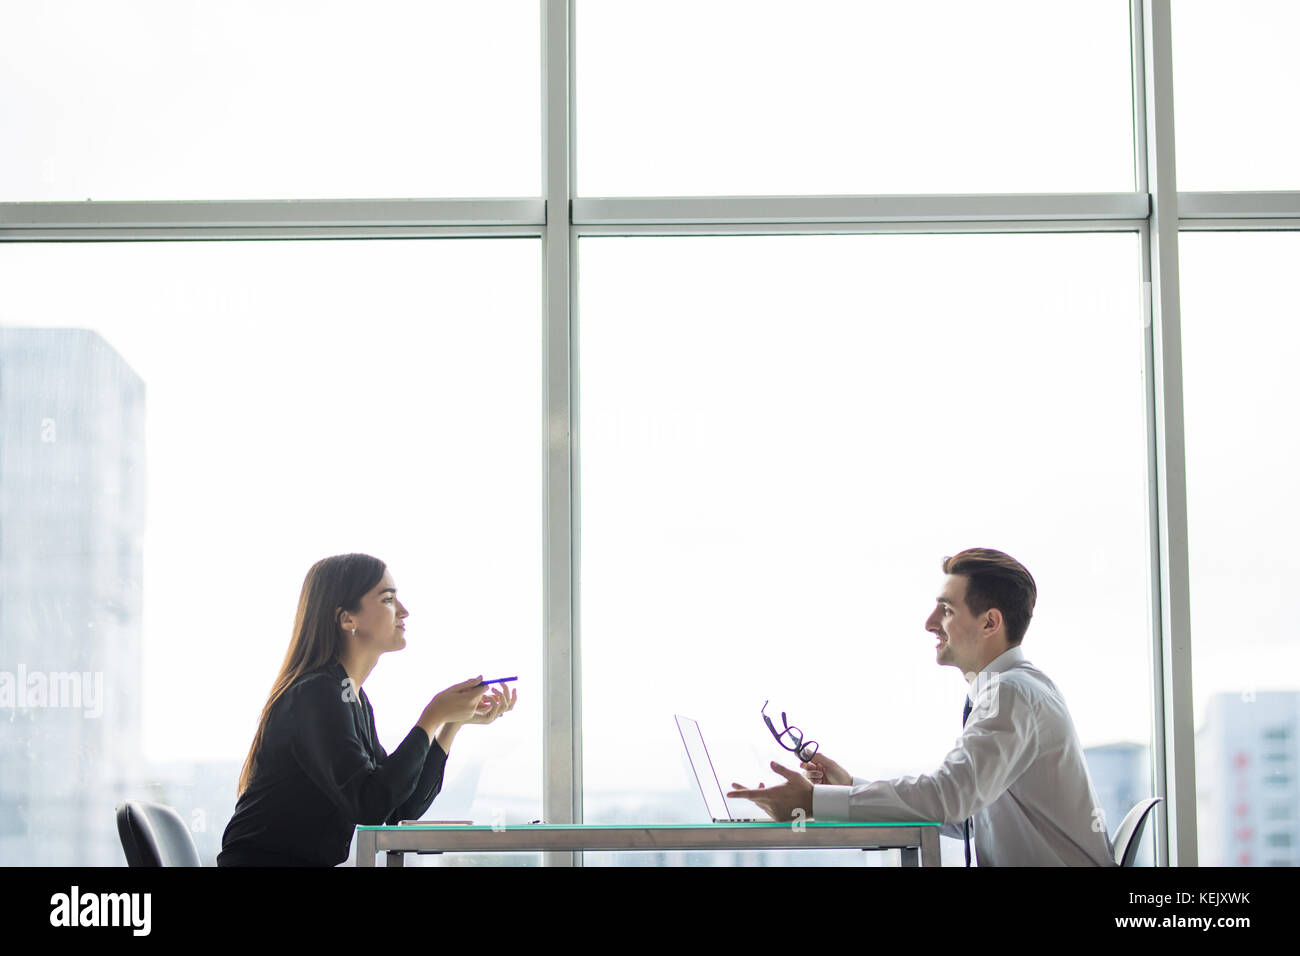 Businessman and businesswoman meeting in modern office Banque D'Images